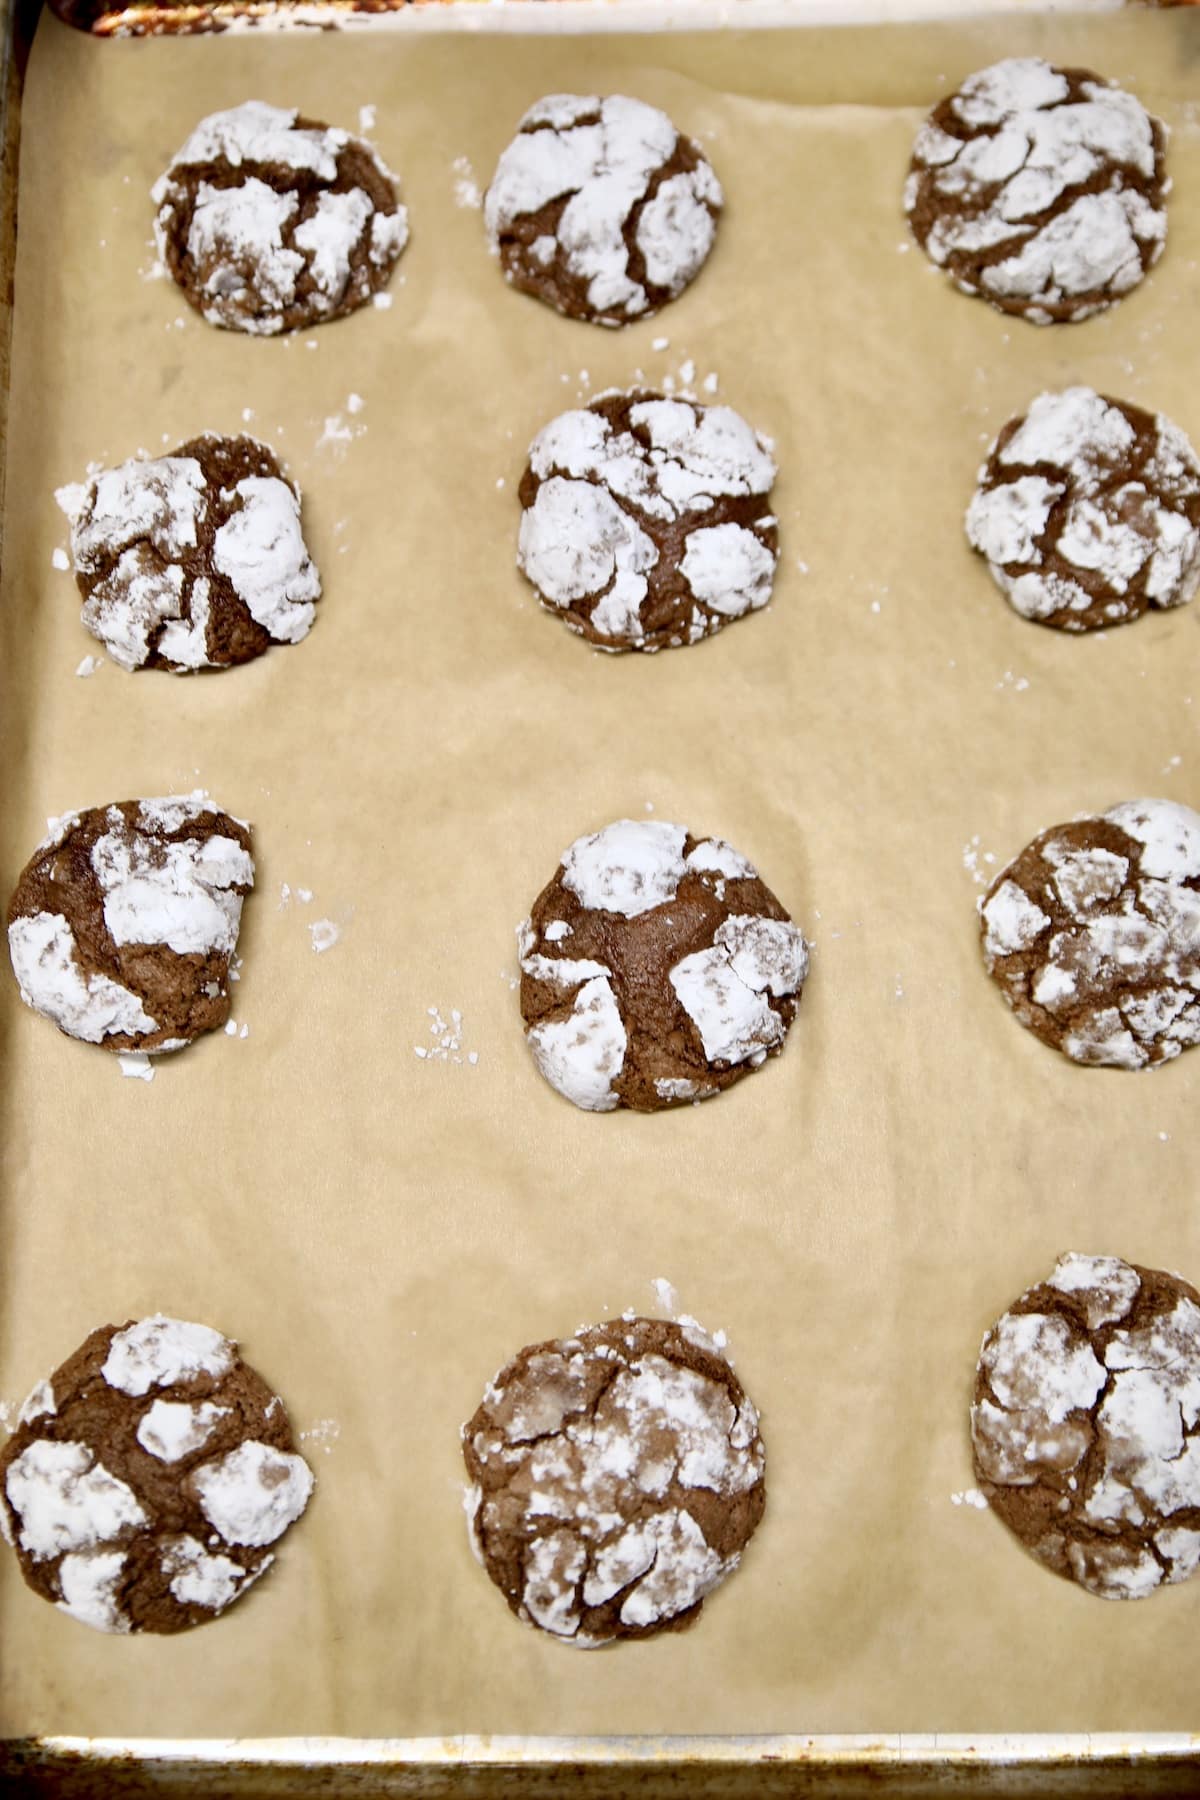 Chocolate crinkle cookies baked on parchment.